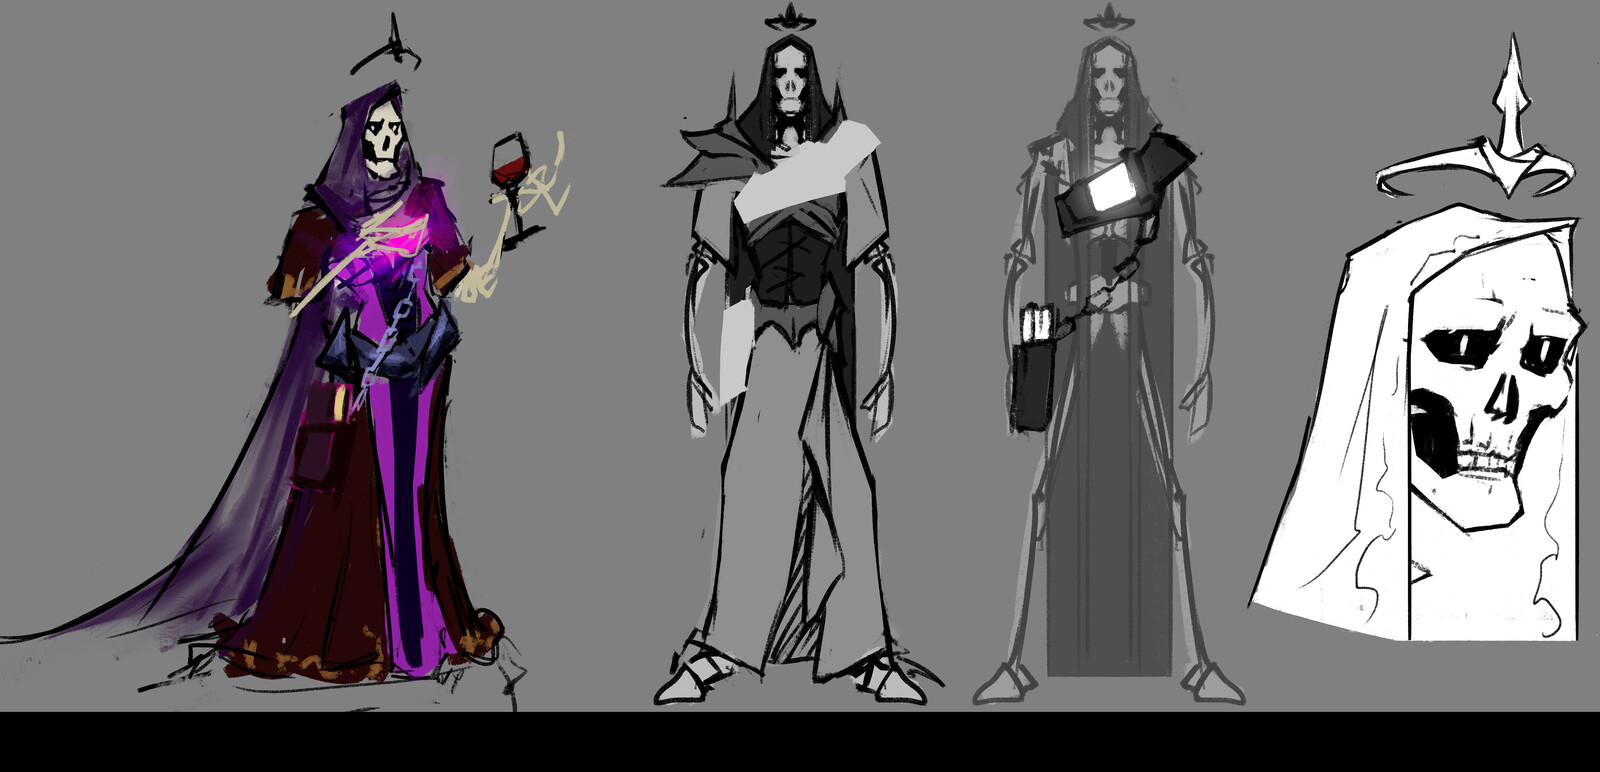 close to final design, client asked that i include a "resting lich face" which, which was a bit hard to include in the final artwork considering the style difference